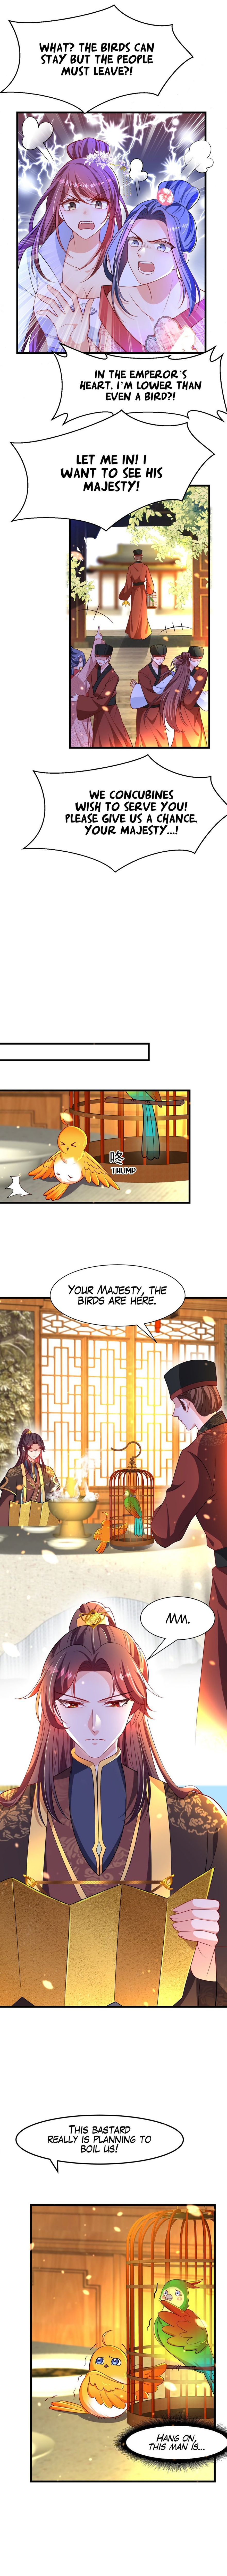 Boss of the Emperor’s Harem chapter 7